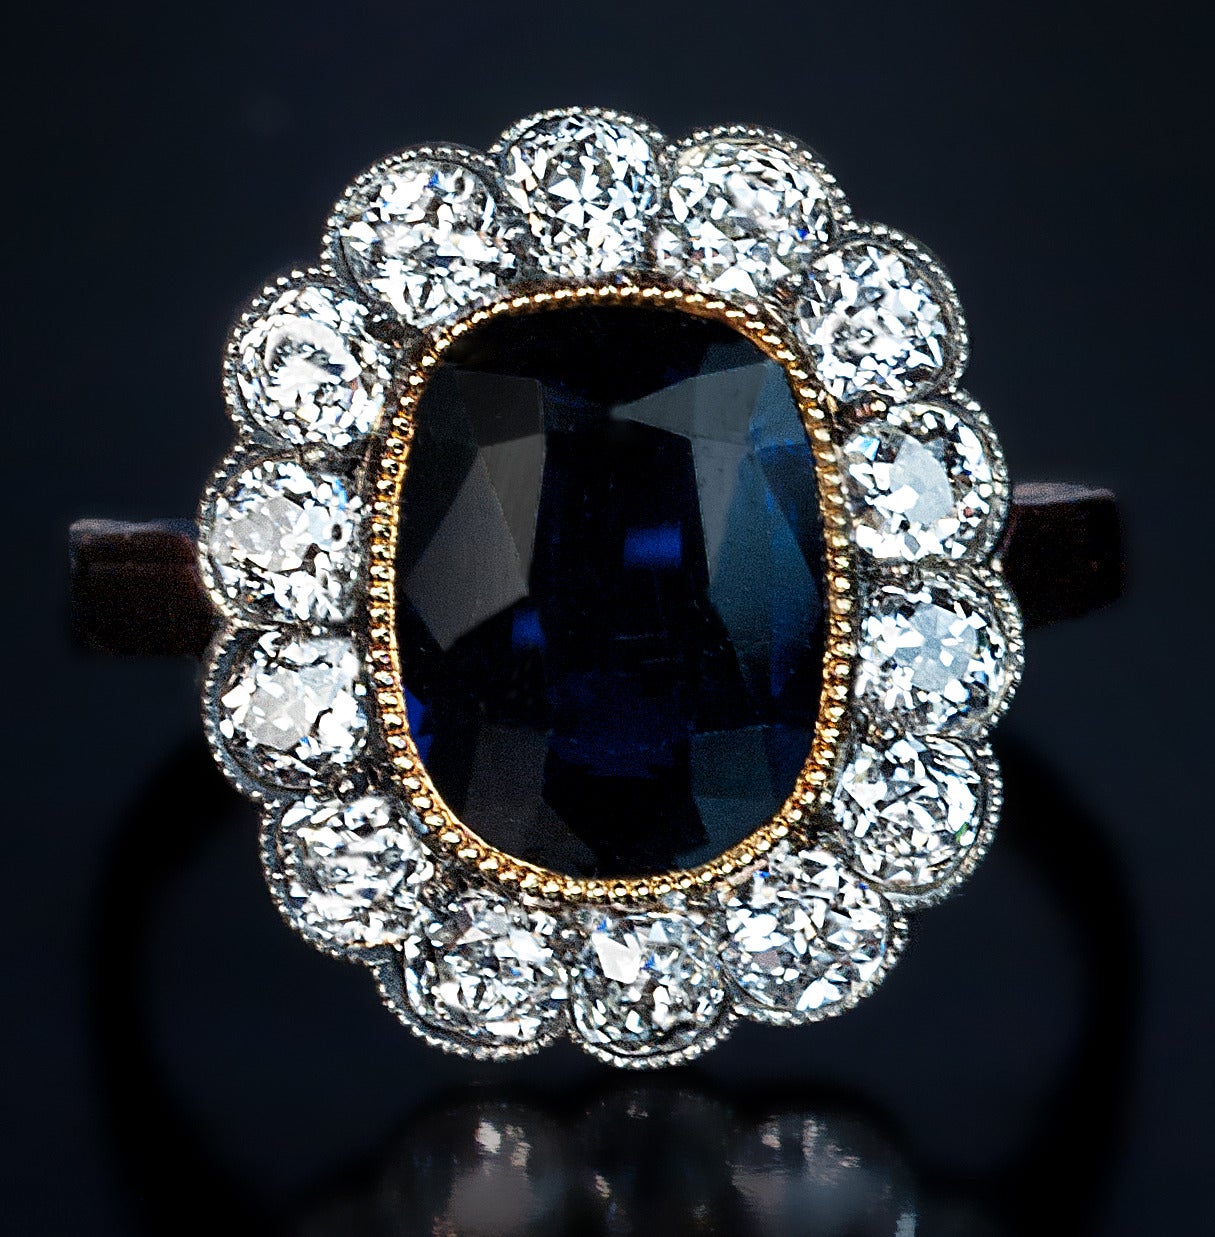 Russian, circa 1910

The 14K gold cluster ring is centered with a cushion cut sapphire (9.8 x 7.4 x 3.6 mm, approximately 2.02 ct) set in a milgrain gold bezel surrounded by 14 old European cut diamonds (estimated total diamond weight 1.40 ct) set